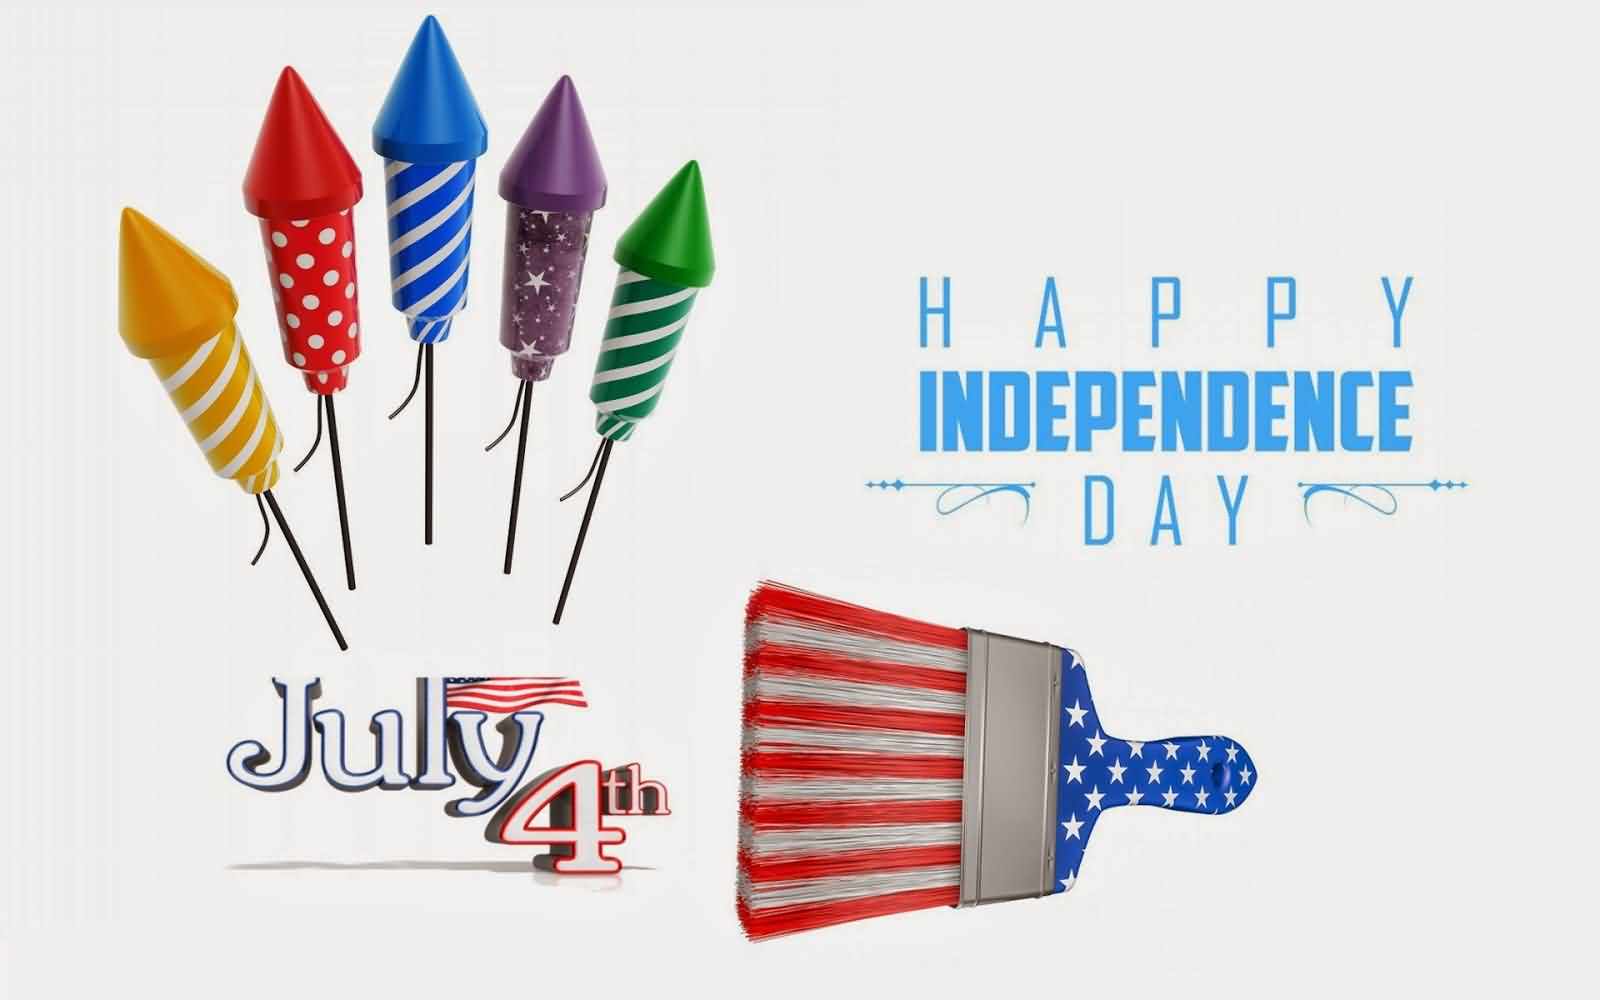 4th Of July Happy Independence America Wishes Card Message With Fireworks Image